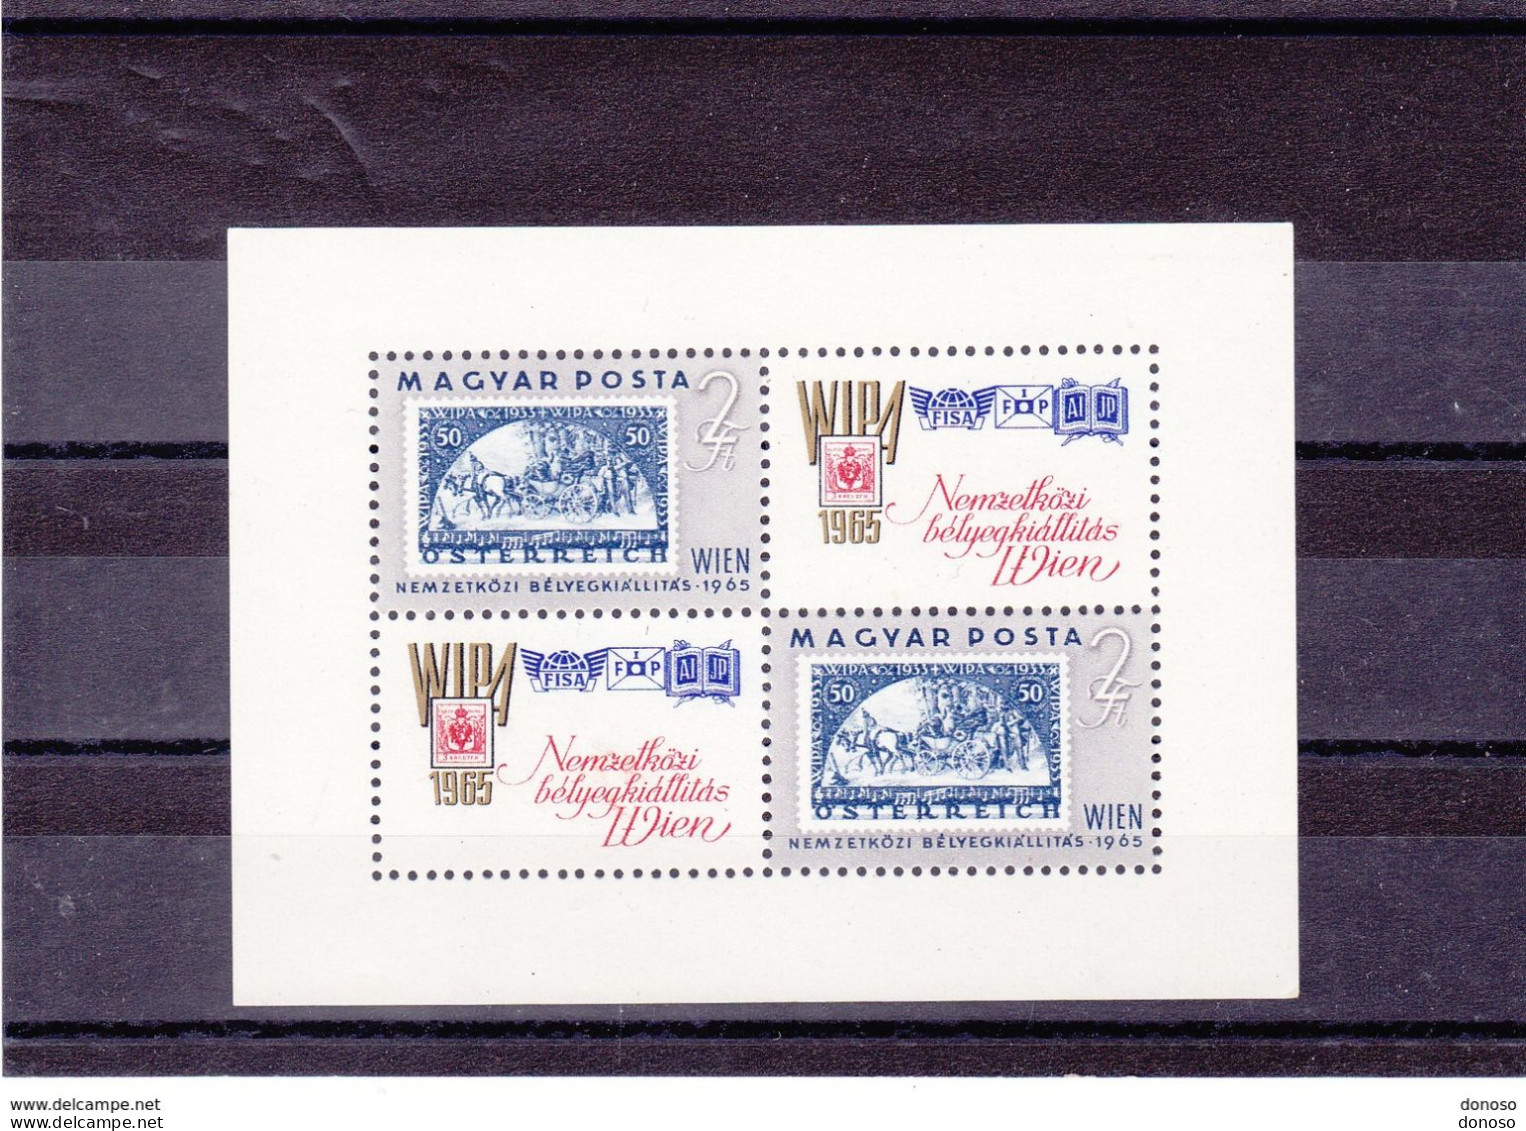 HONGRIE 1965 WIPA Timbres Su Timbres Yvert BF 53, Michel Block 47 NEUF** MNH Cote Yv 10 Euros - Blocs-feuillets